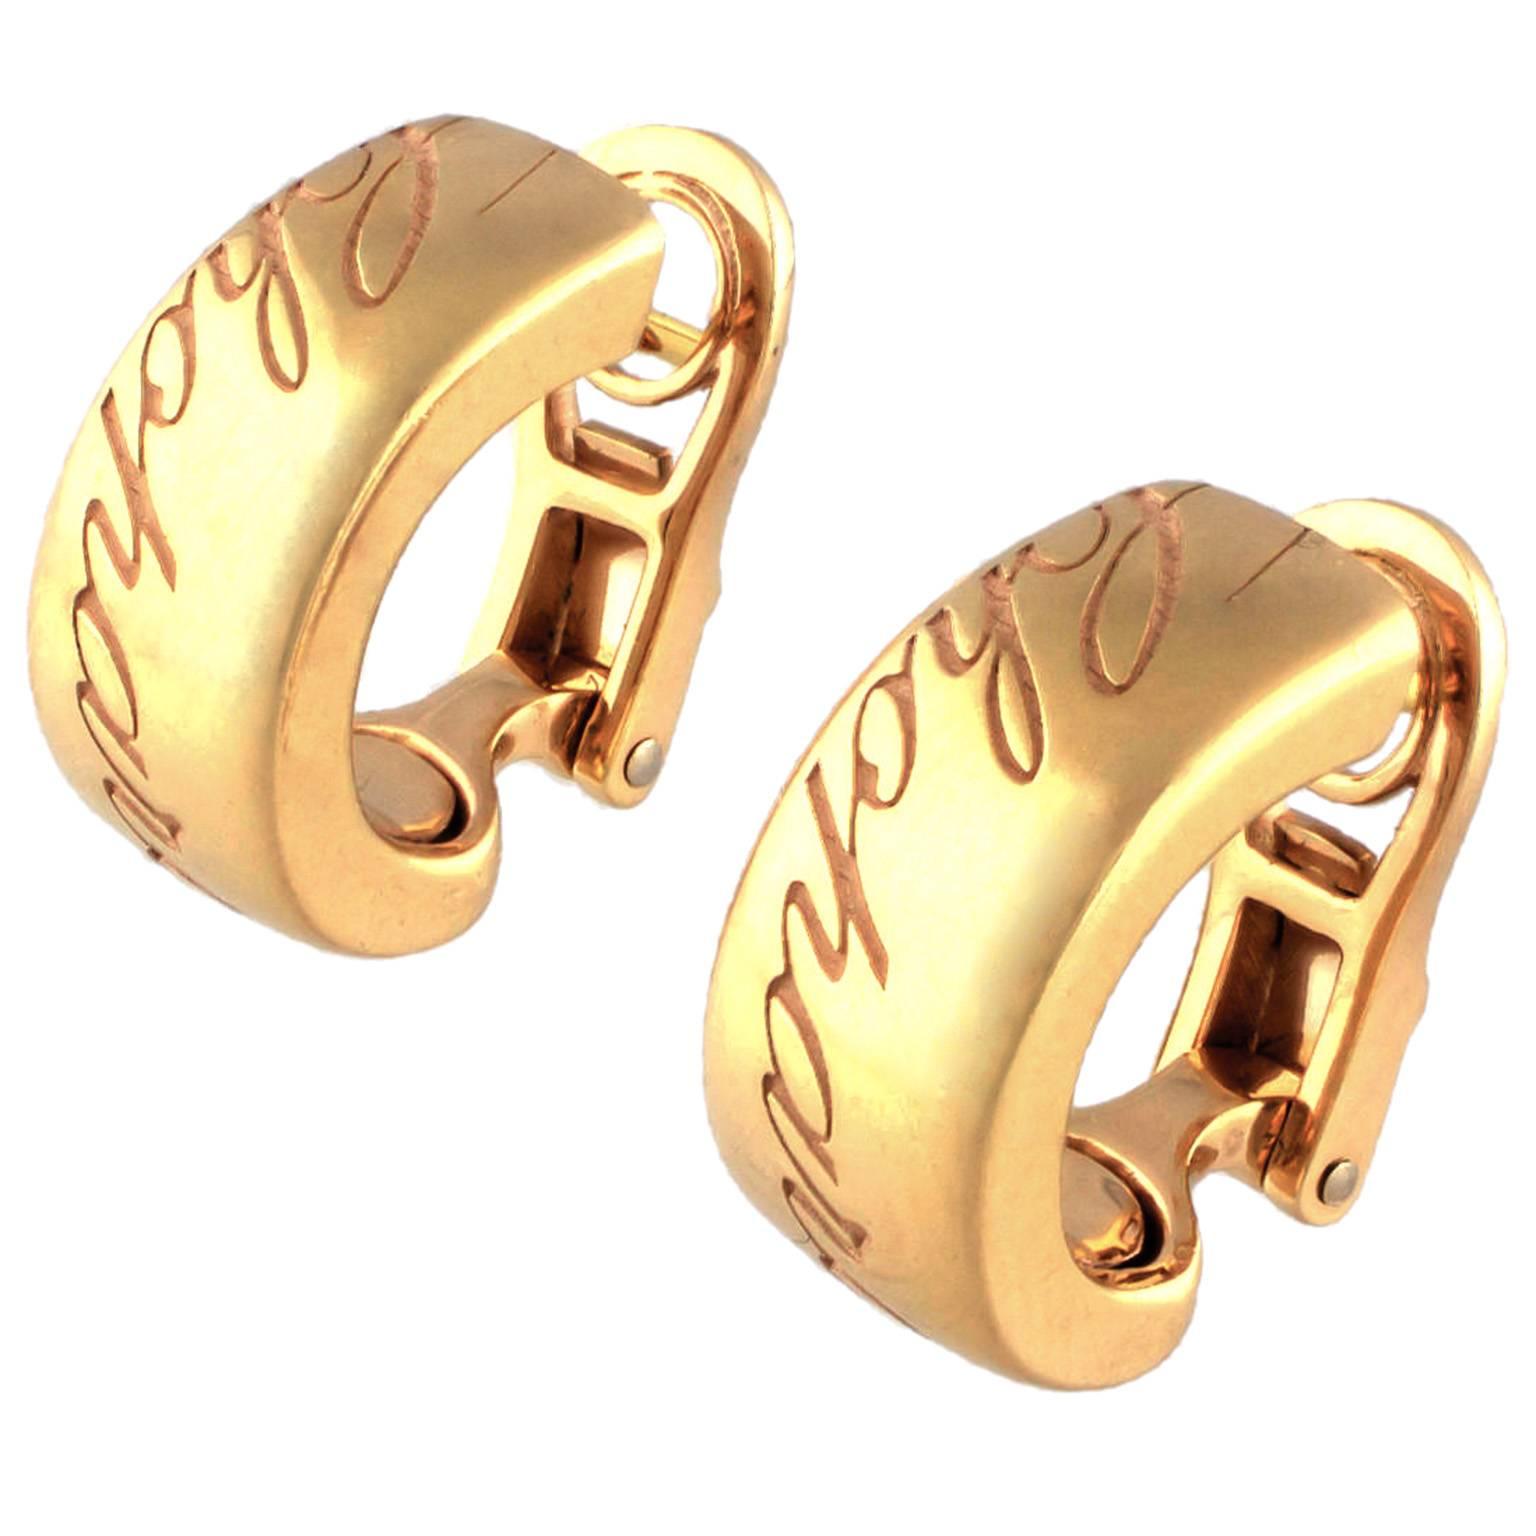 Chopard Chopardissimo 18K Rose Gold Earrings For Sale